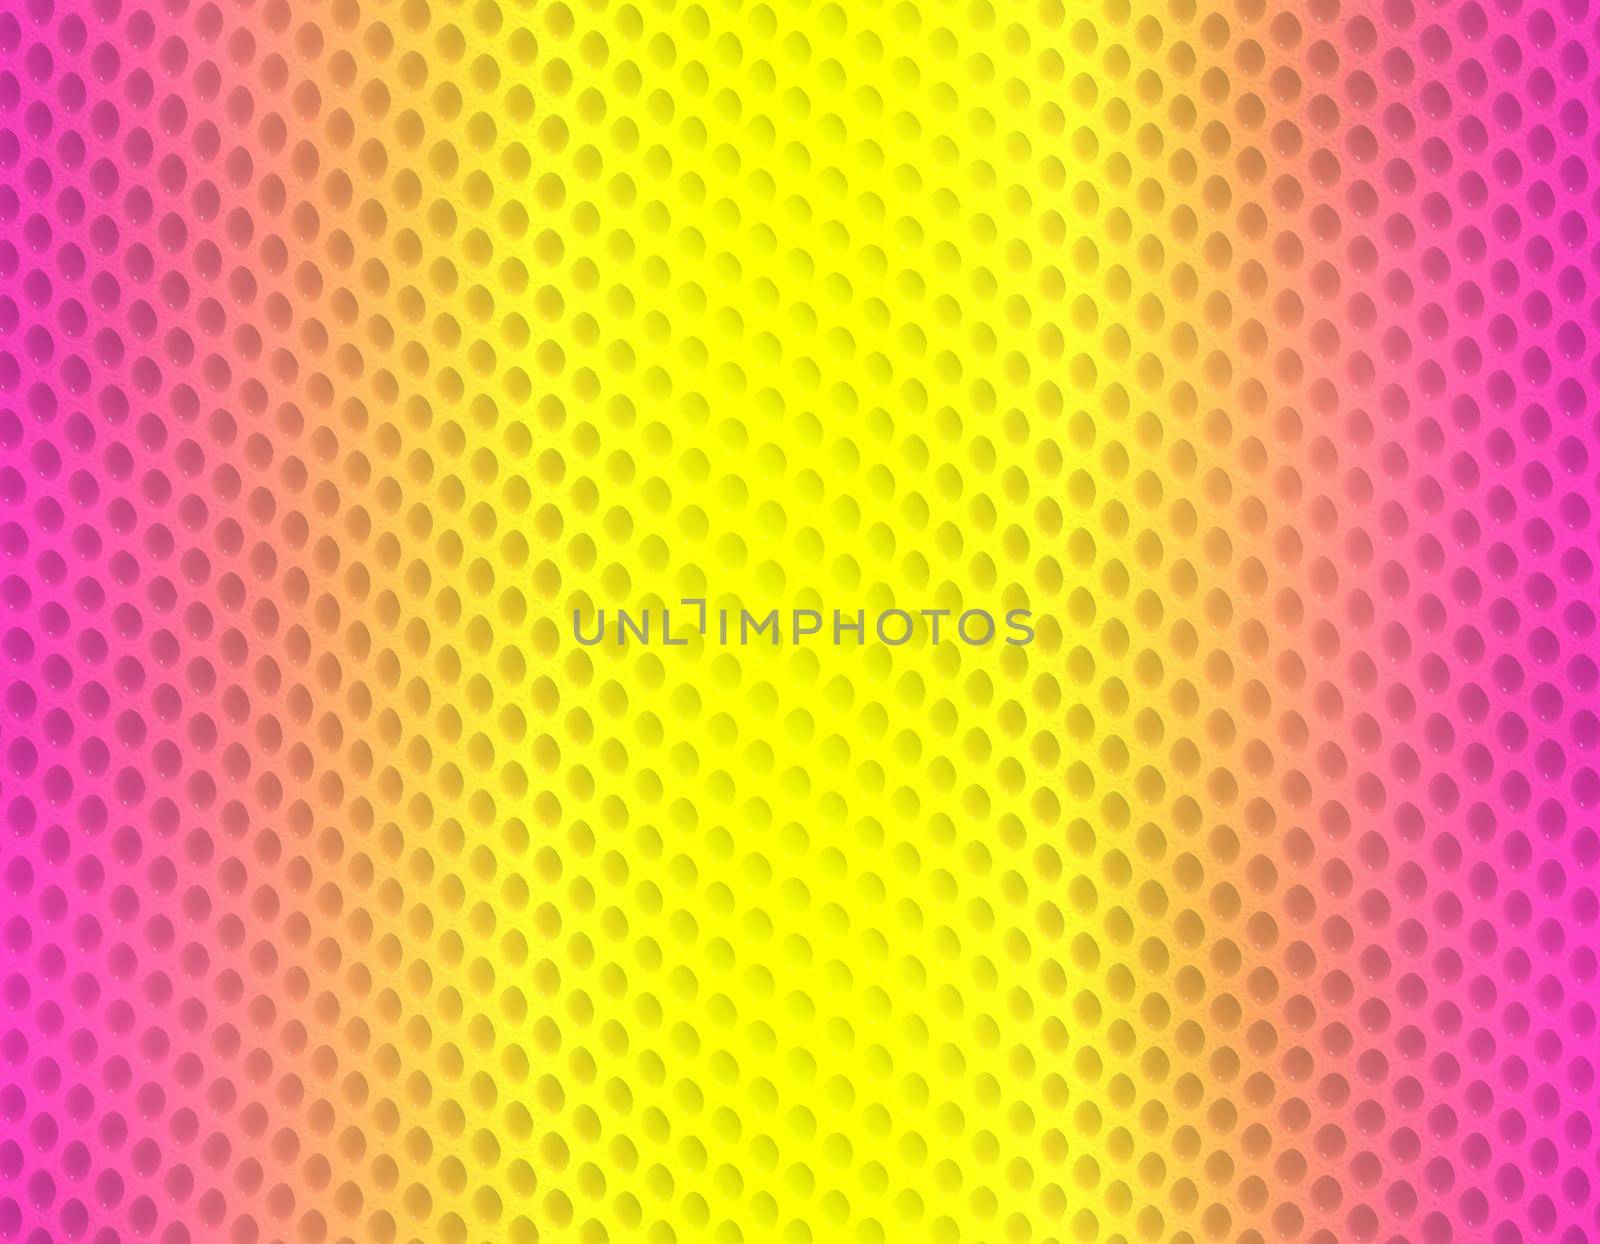 Magenta and yellow gradient snake skin pattern, bubble scale by Bezdnatm